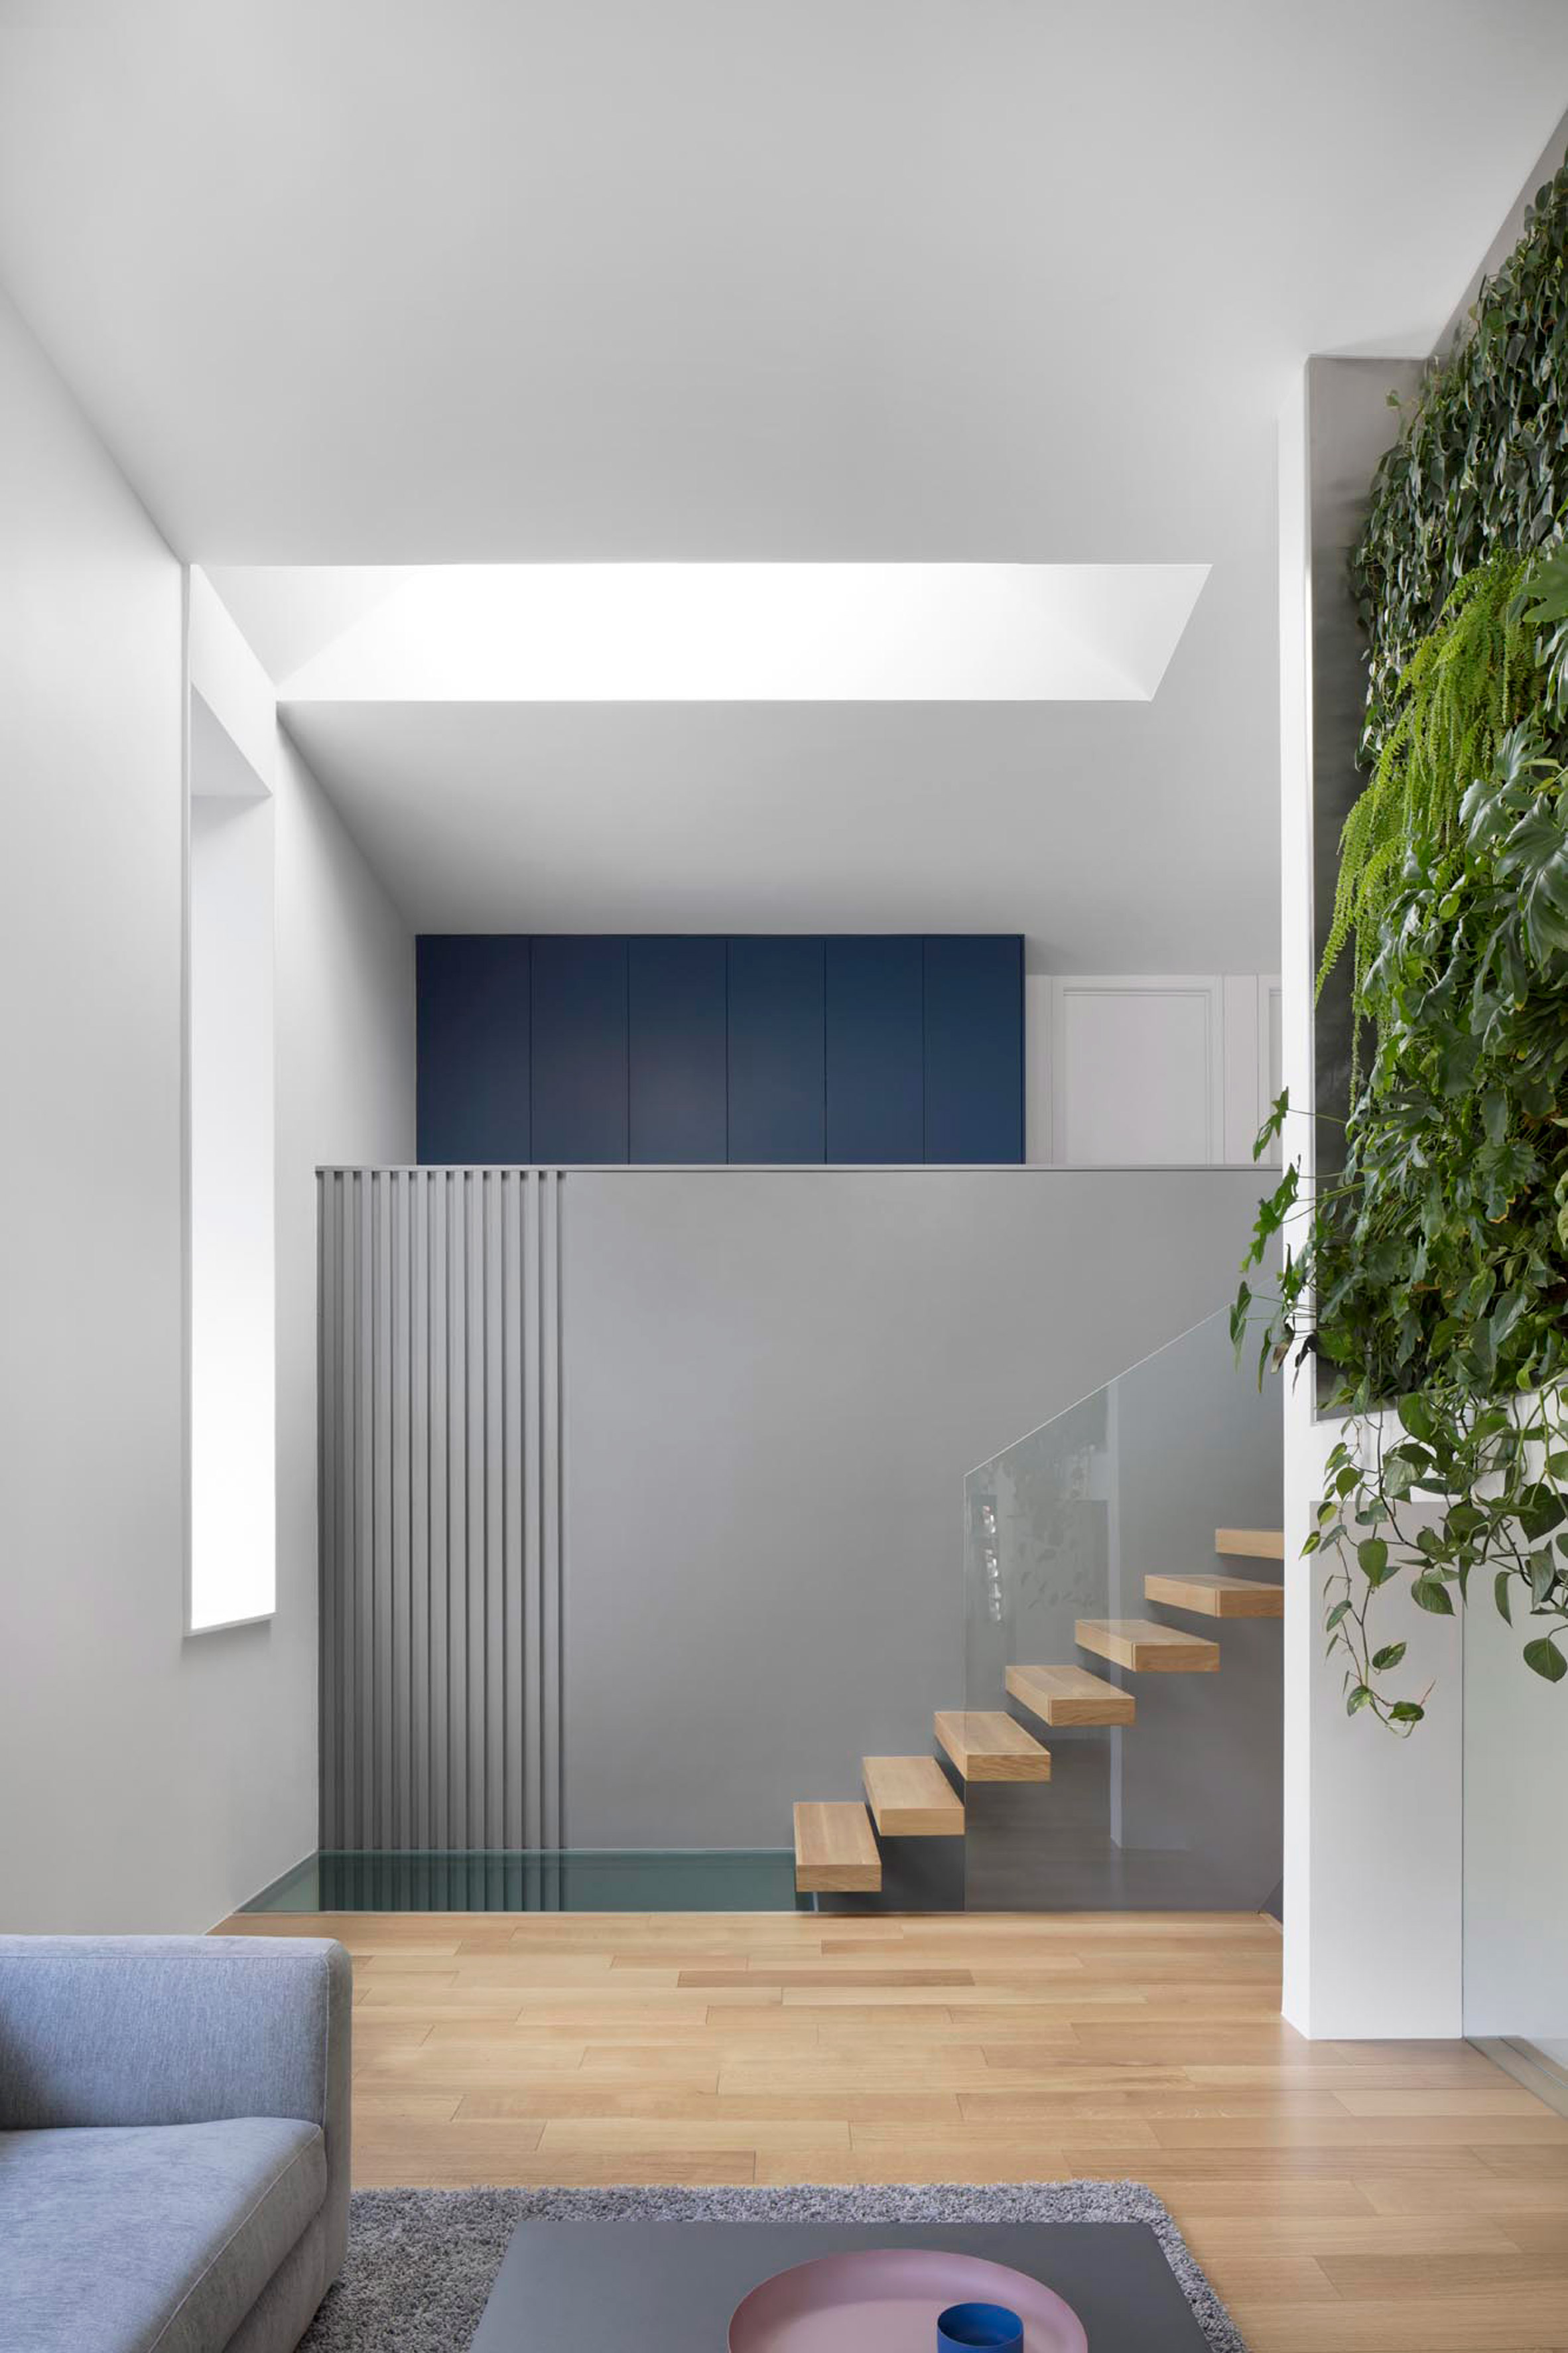 Naturehumaine enlivens mid-century Montreal house with plant-covered wall